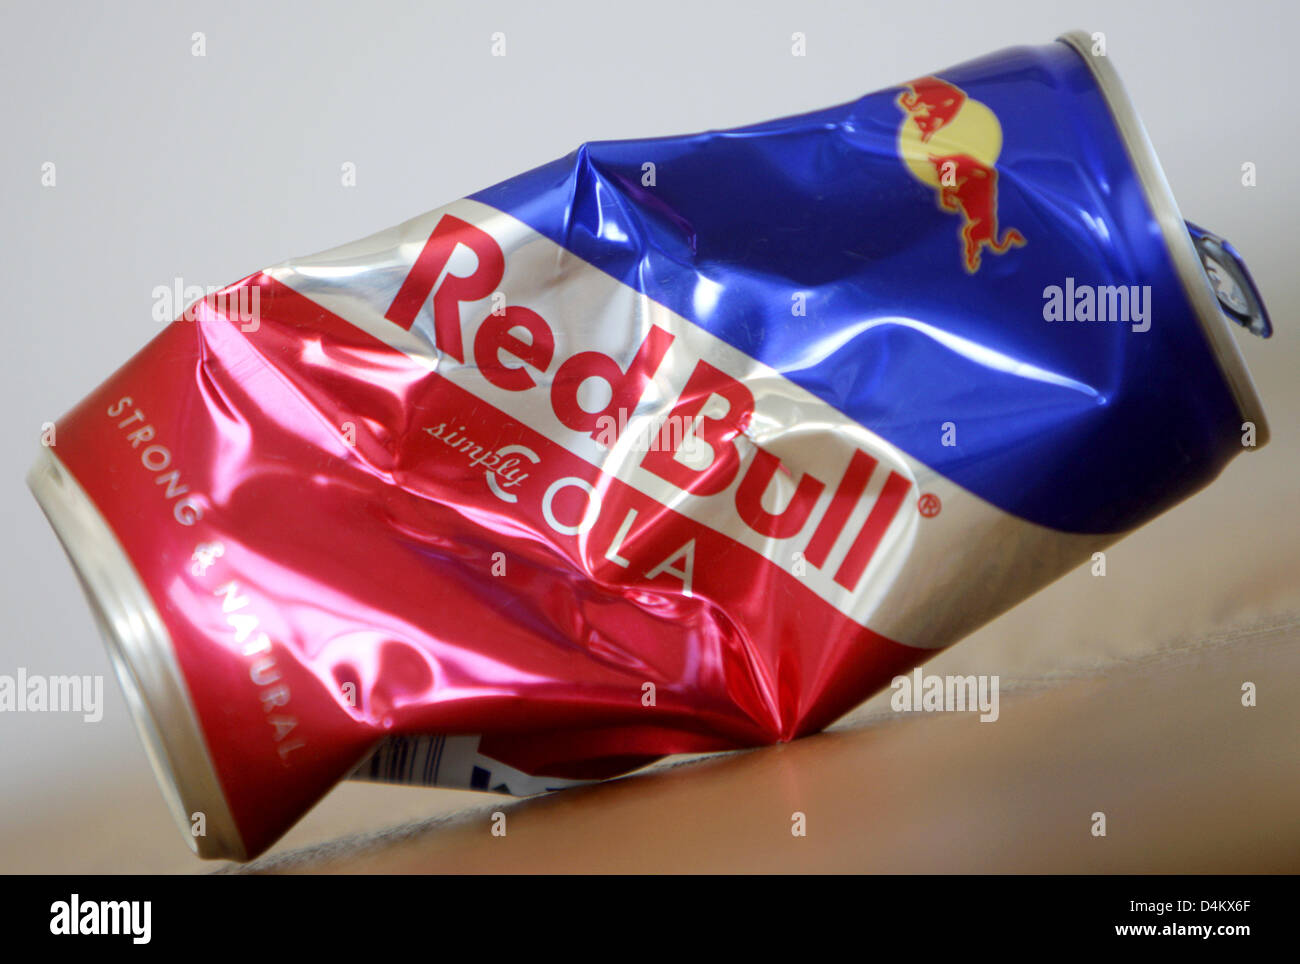 The picture shows a can of Red Bull Coke in Cologne, Germany, 24 May 2009. After the detection of traces of cocaine in the coke of Red Bull, food inspectorates of Hesse, North Rhine Westphalia, Thuringia and Rhineland-Palatinate banned the drink from sale. Photo: Rolf Vennenbernd Stock Photo